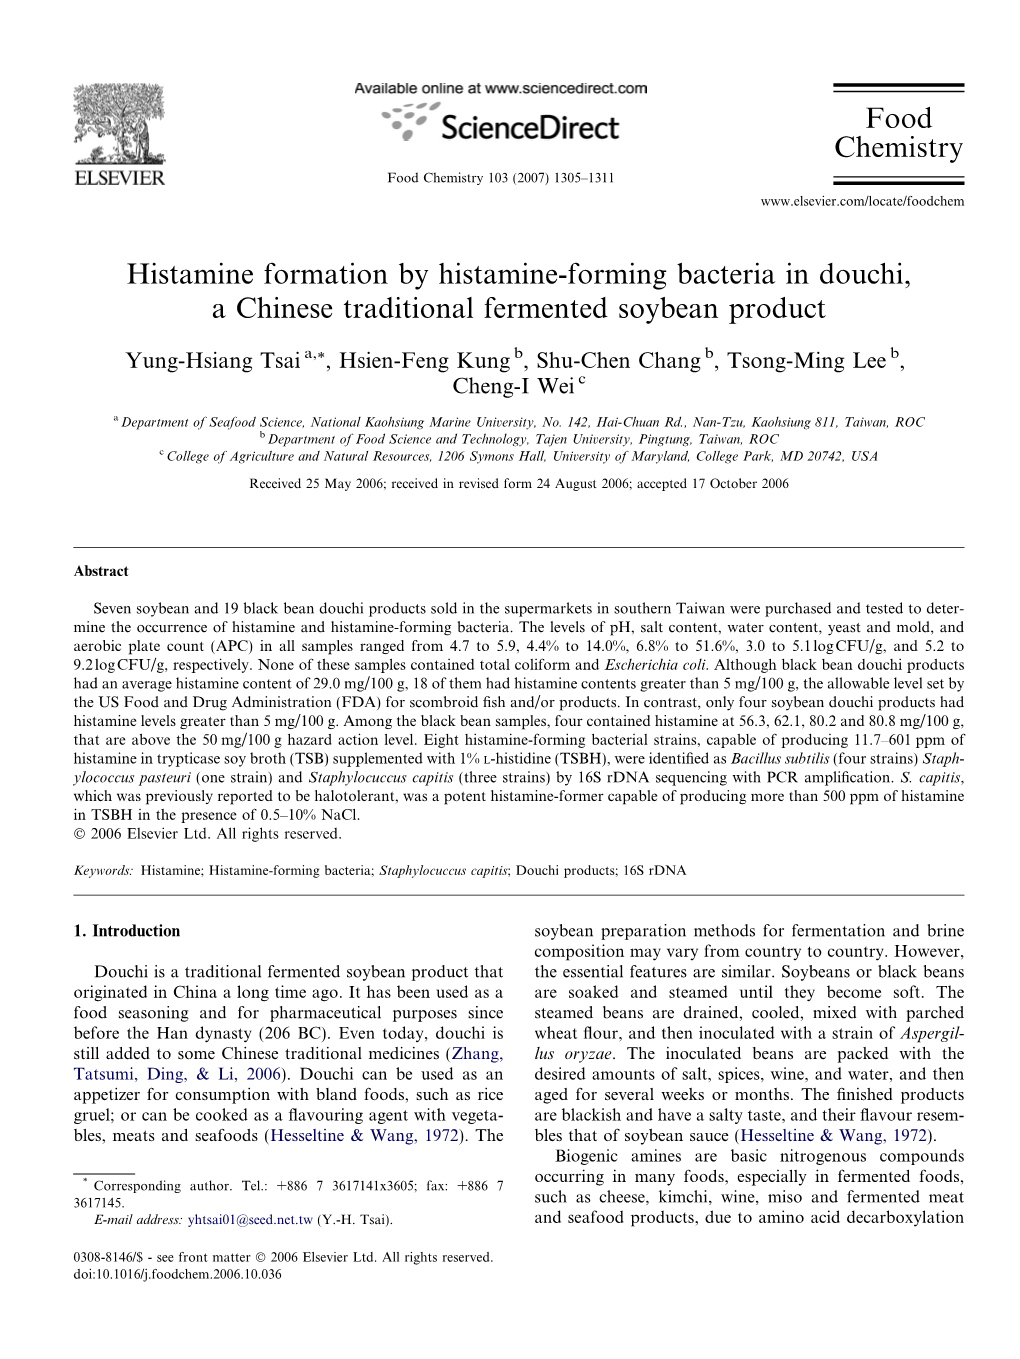 Histamine Formation by Histamine-Forming Bacteria in Douchi, a Chinese Traditional Fermented Soybean Product Food Chemistry